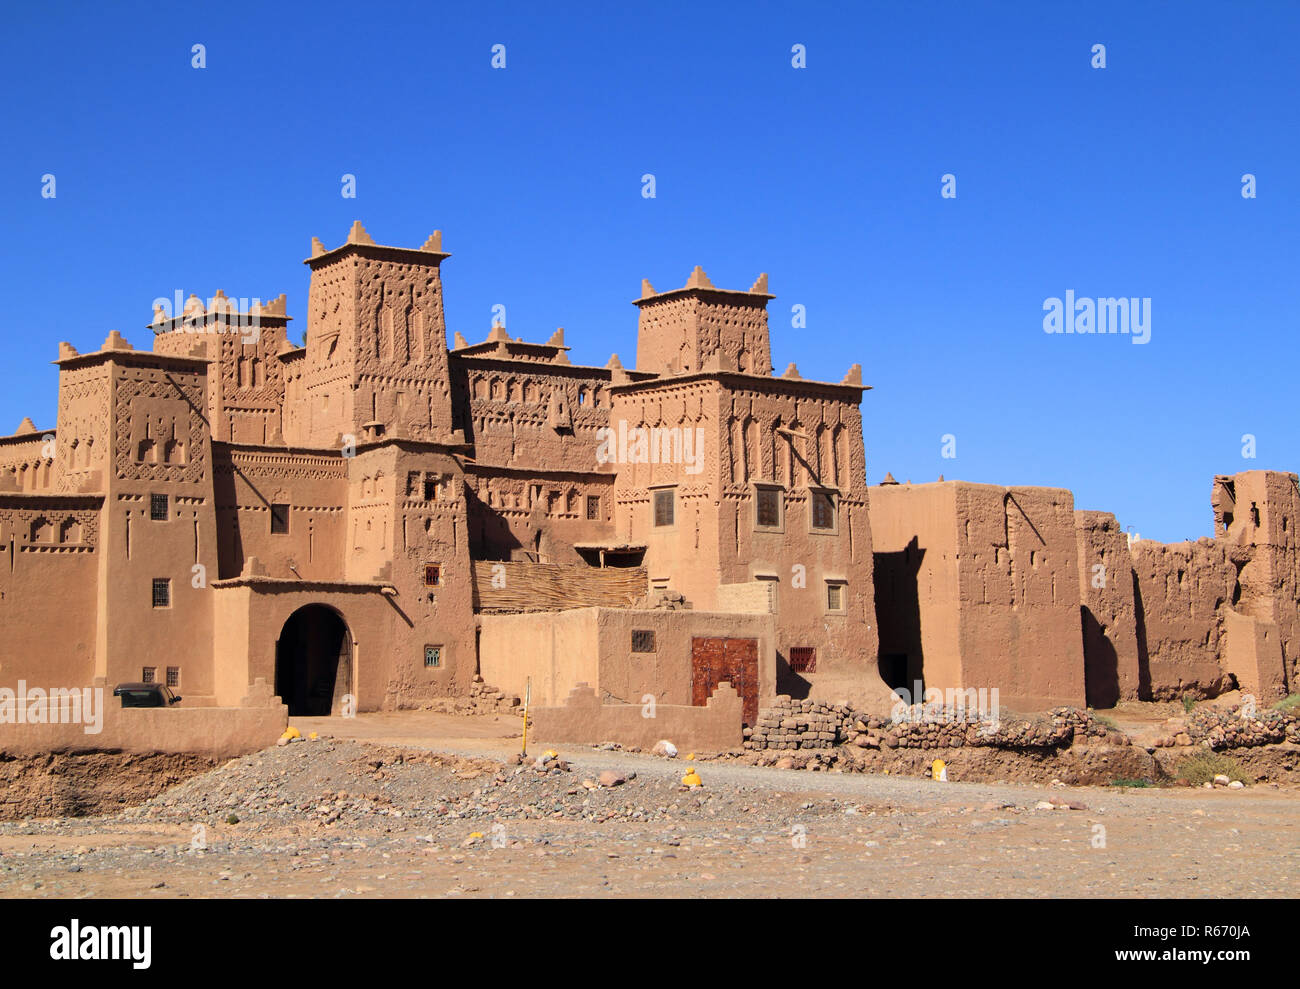 Morocco, Ouarzazate, Skoura, Amridil Kasbah Towers decorated with Berber geometrical symbols. The kasbah is depicted in Morocco's 50 Dirham banknotes. Stock Photo